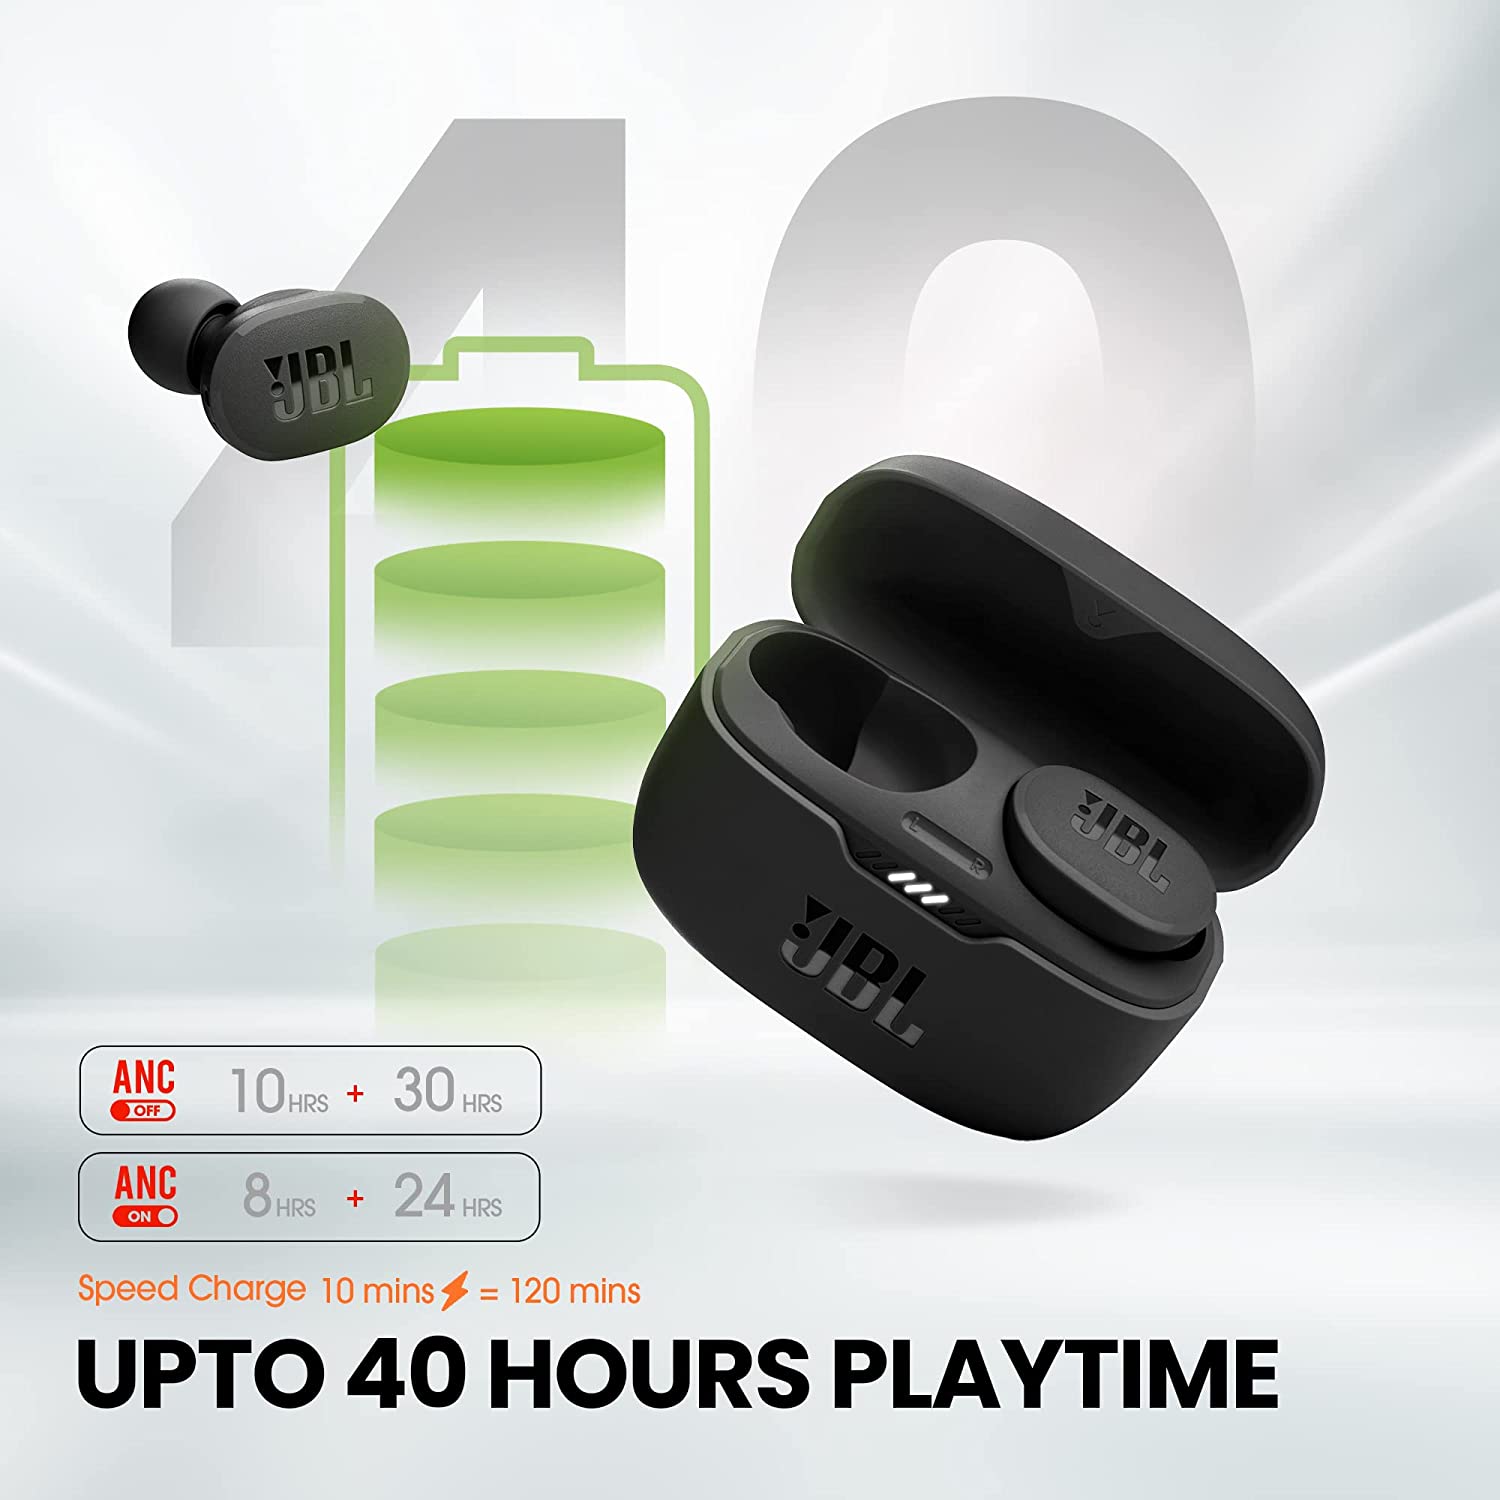 New JBL Tune 130NC TWS | Active Noise Cancellation Earbuds, JBL APP, 40Hrs, 4Mics for Clear Calls | BT 5.2 (Black)